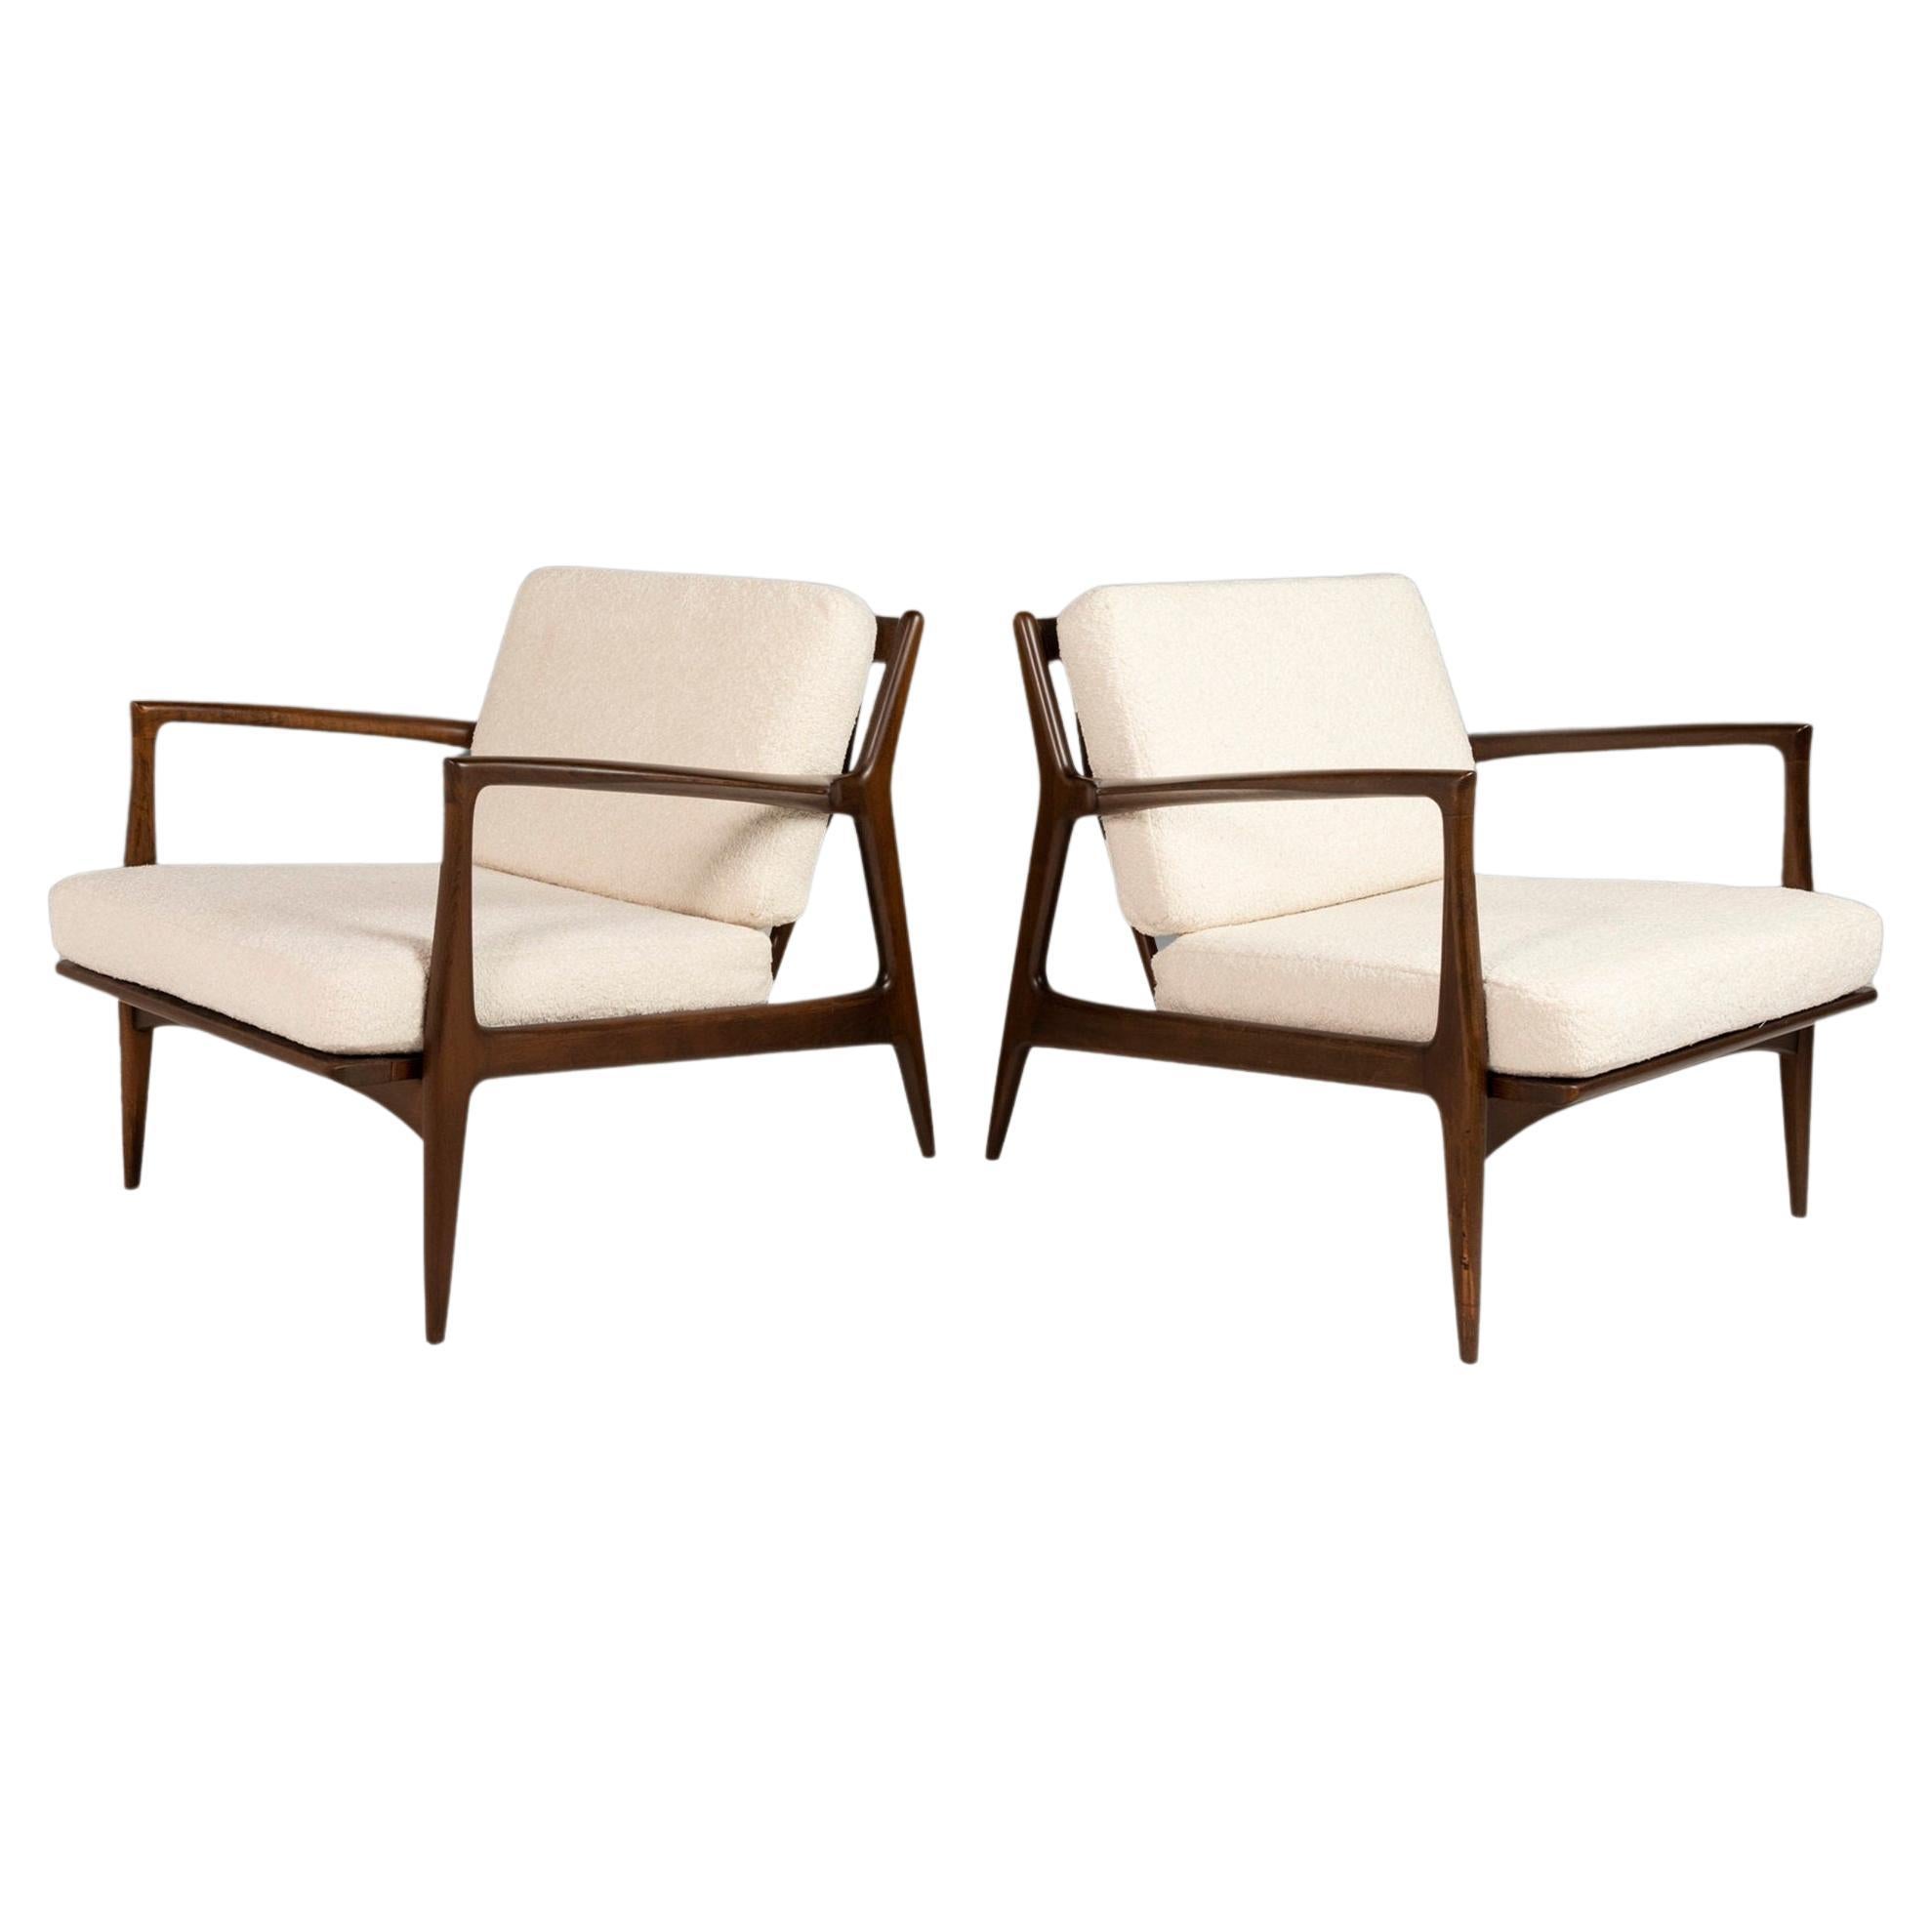 Set of Two '2' 'Blade' Lounge Chairs by Ib Kofod-Larsen for Selig, Denmark, 1950